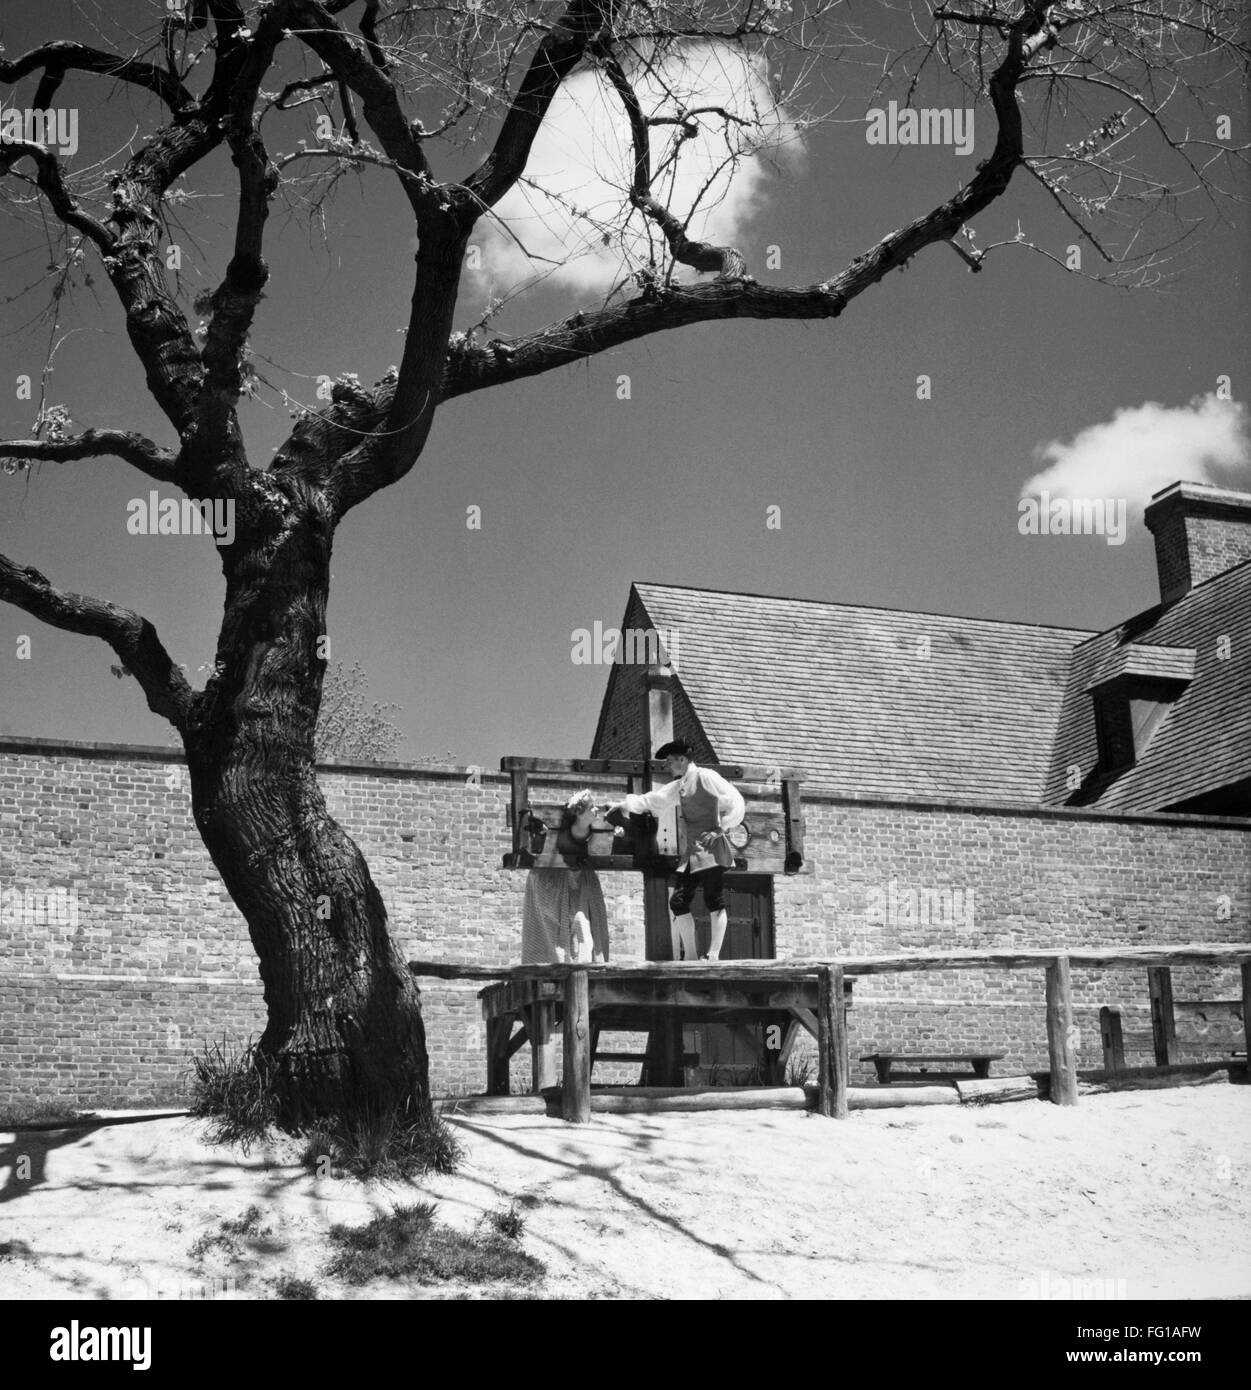 COLONIAL WILLIAMSBURG. /nA reconstruction of the Public Gaol in Williamsburg, Virginia, c1700. Photograph, c1965. Stock Photo